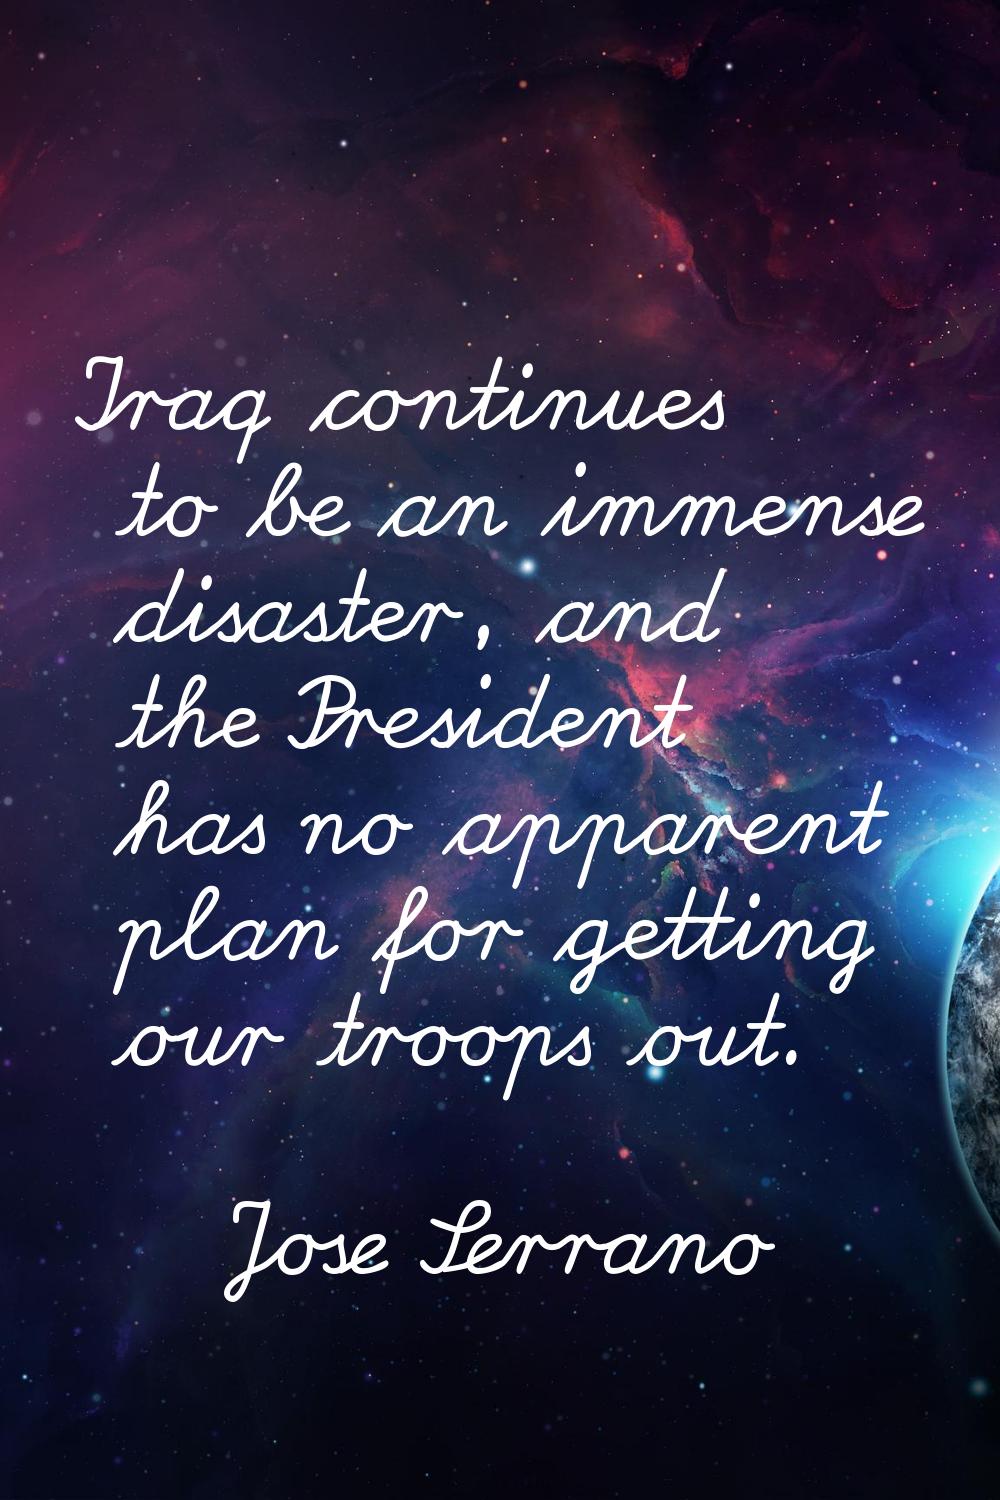 Iraq continues to be an immense disaster, and the President has no apparent plan for getting our tr